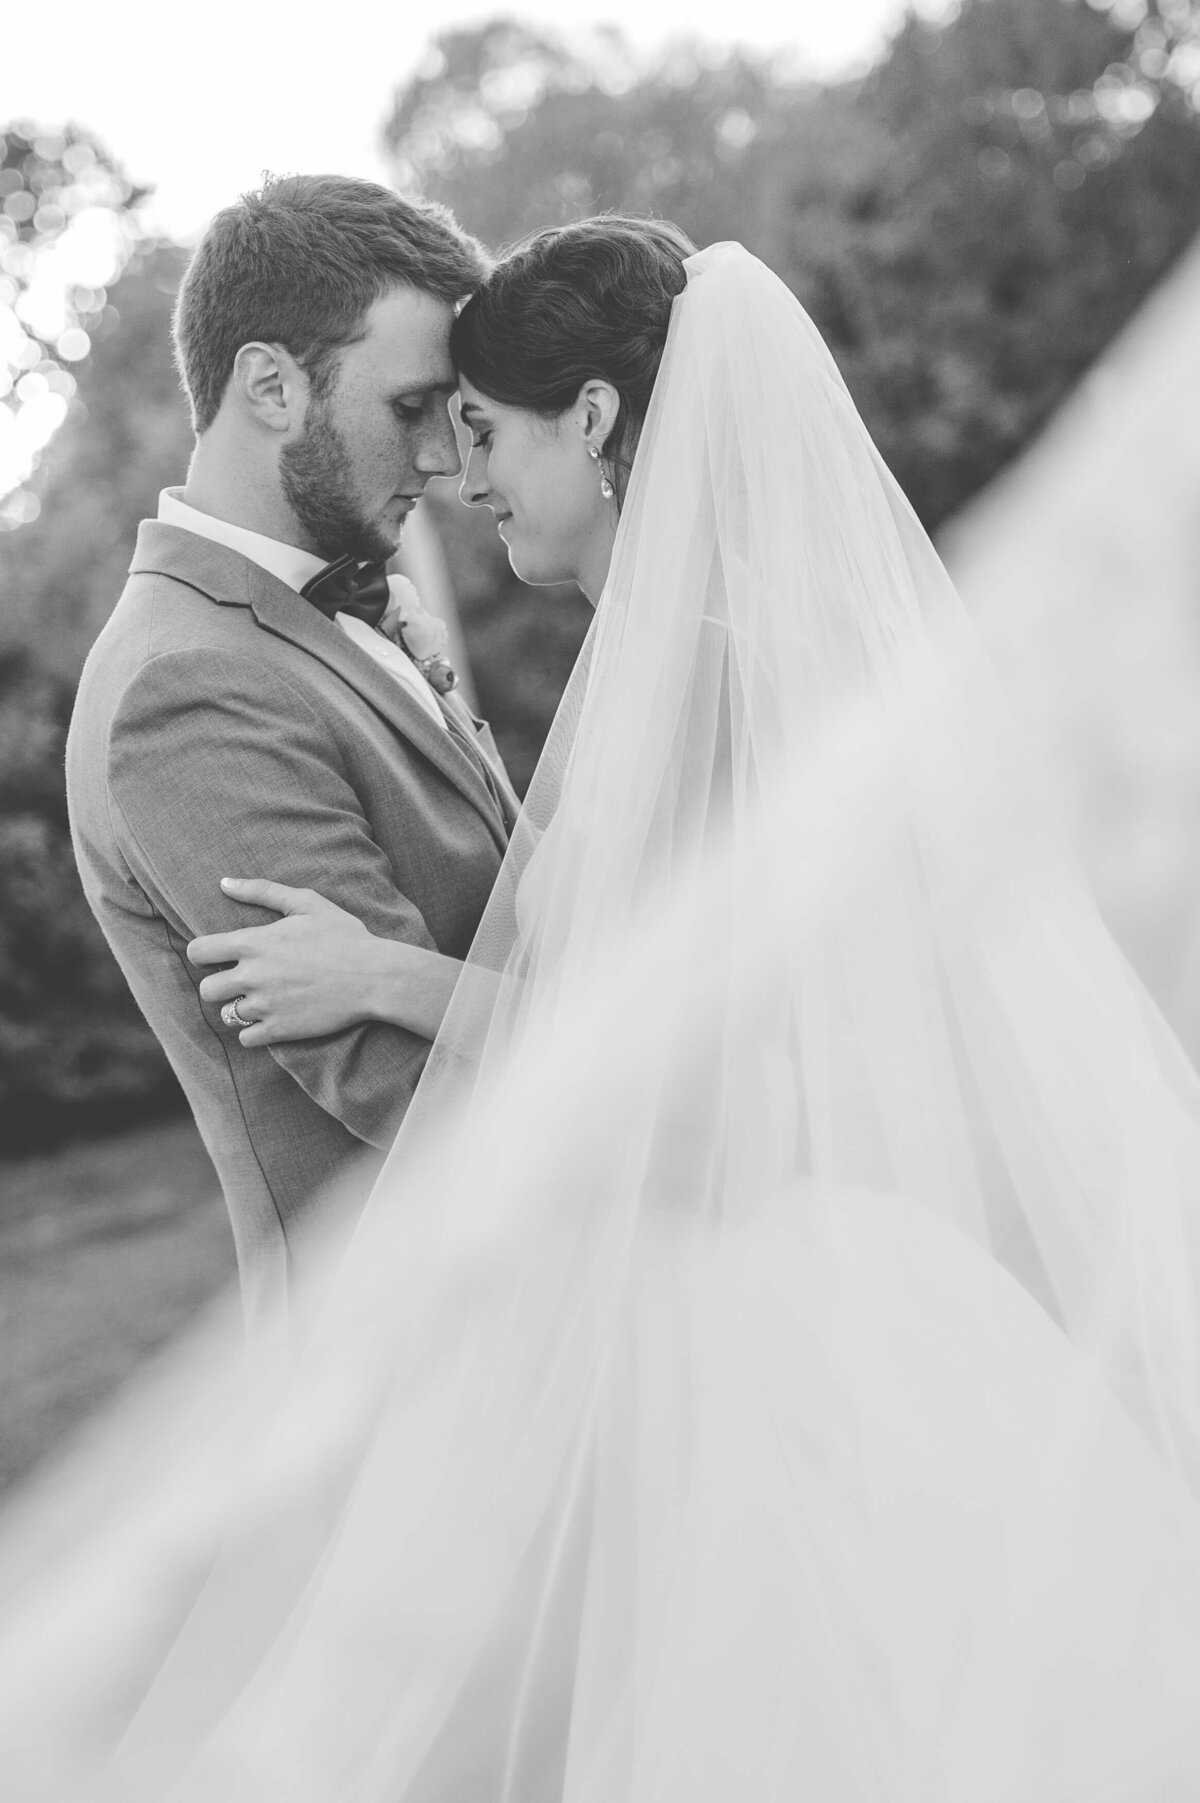 Black and white Ottawa wedding photography of a bride and groom embracing with a flowing veil